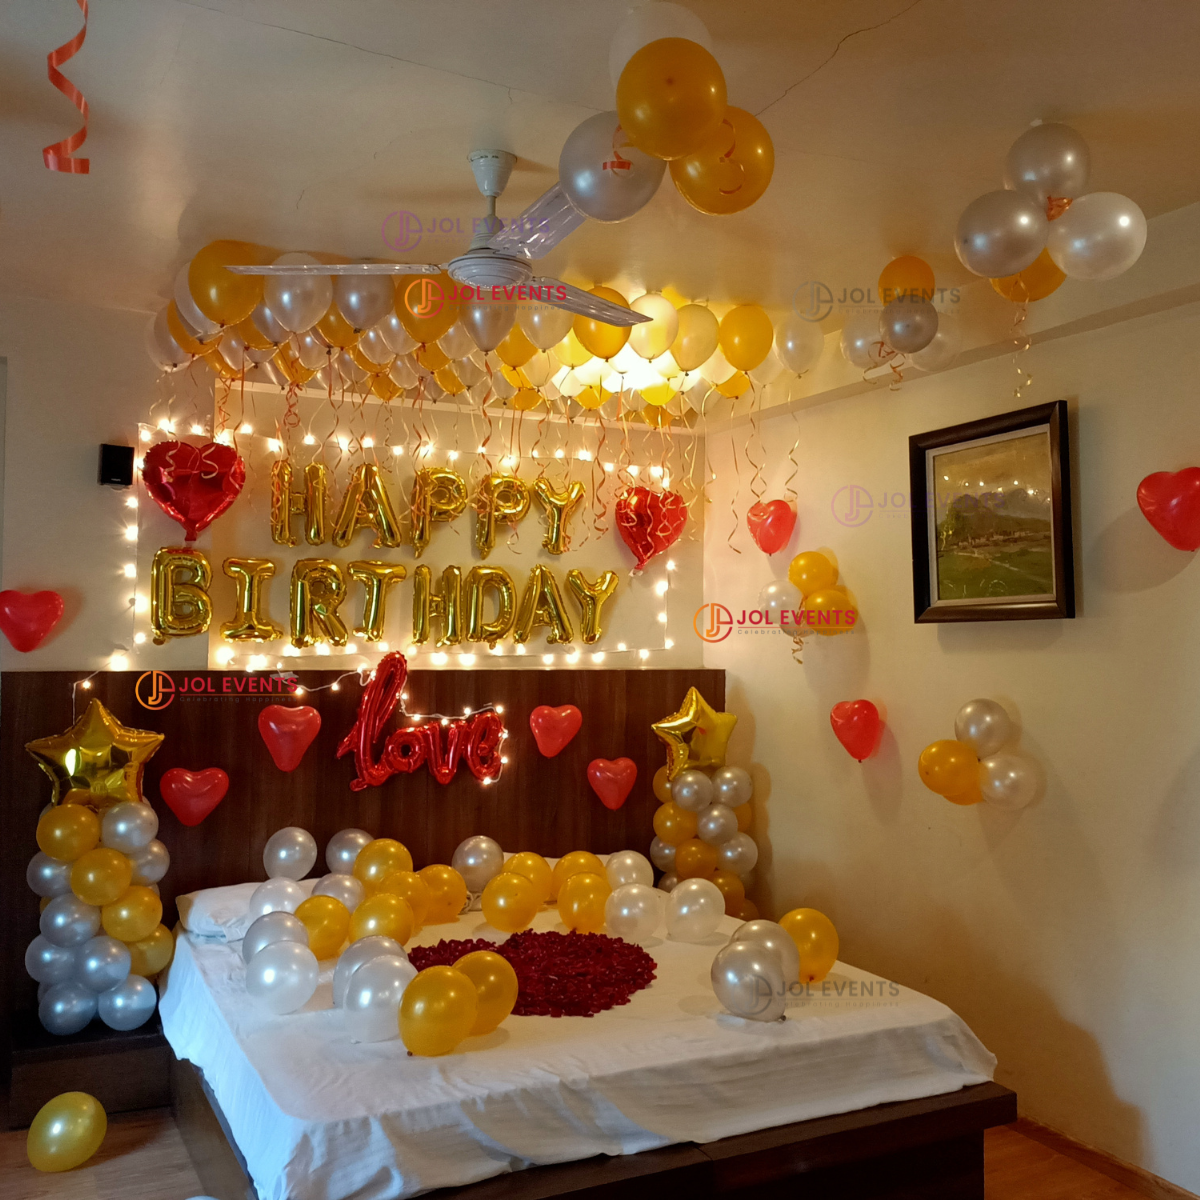 Romantic Birthday Decoration Ideas at Home | Surprise Birthday Decor for  Husband - YouTube